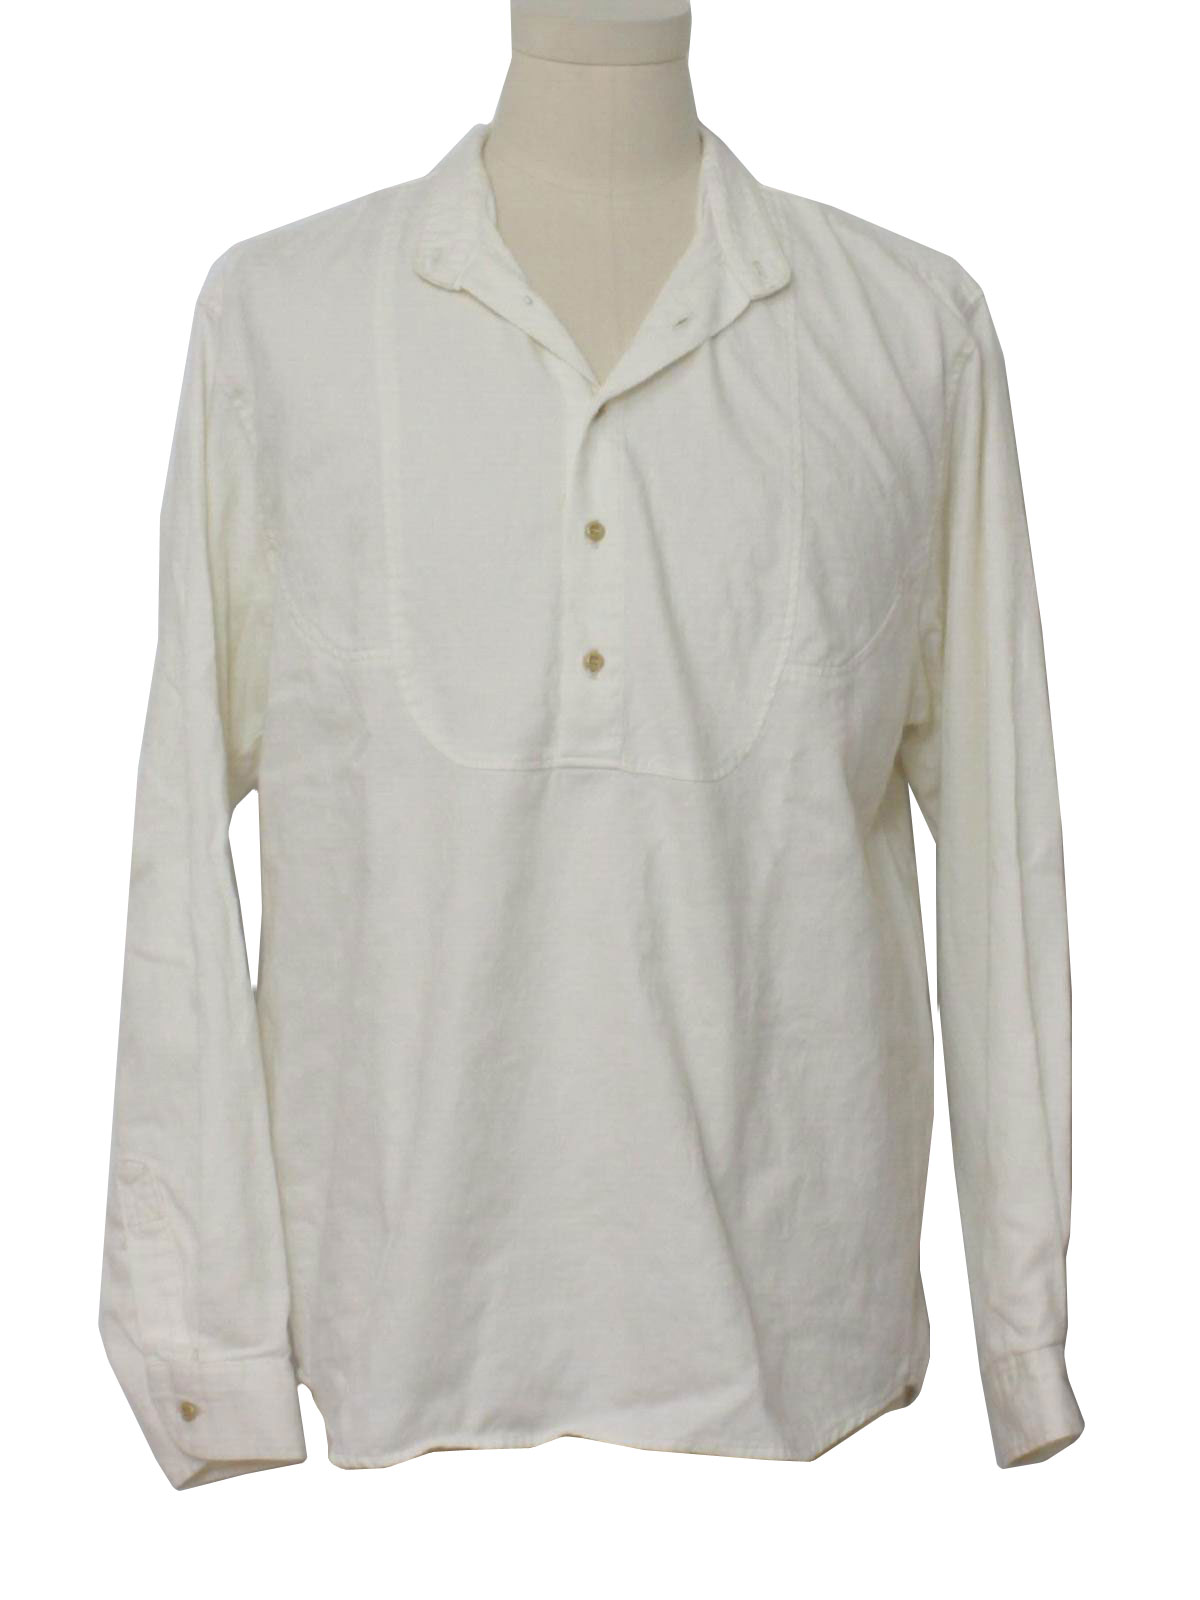 Western Shirt: 90s -Wah frontier- Mens 19th century western style cream ...